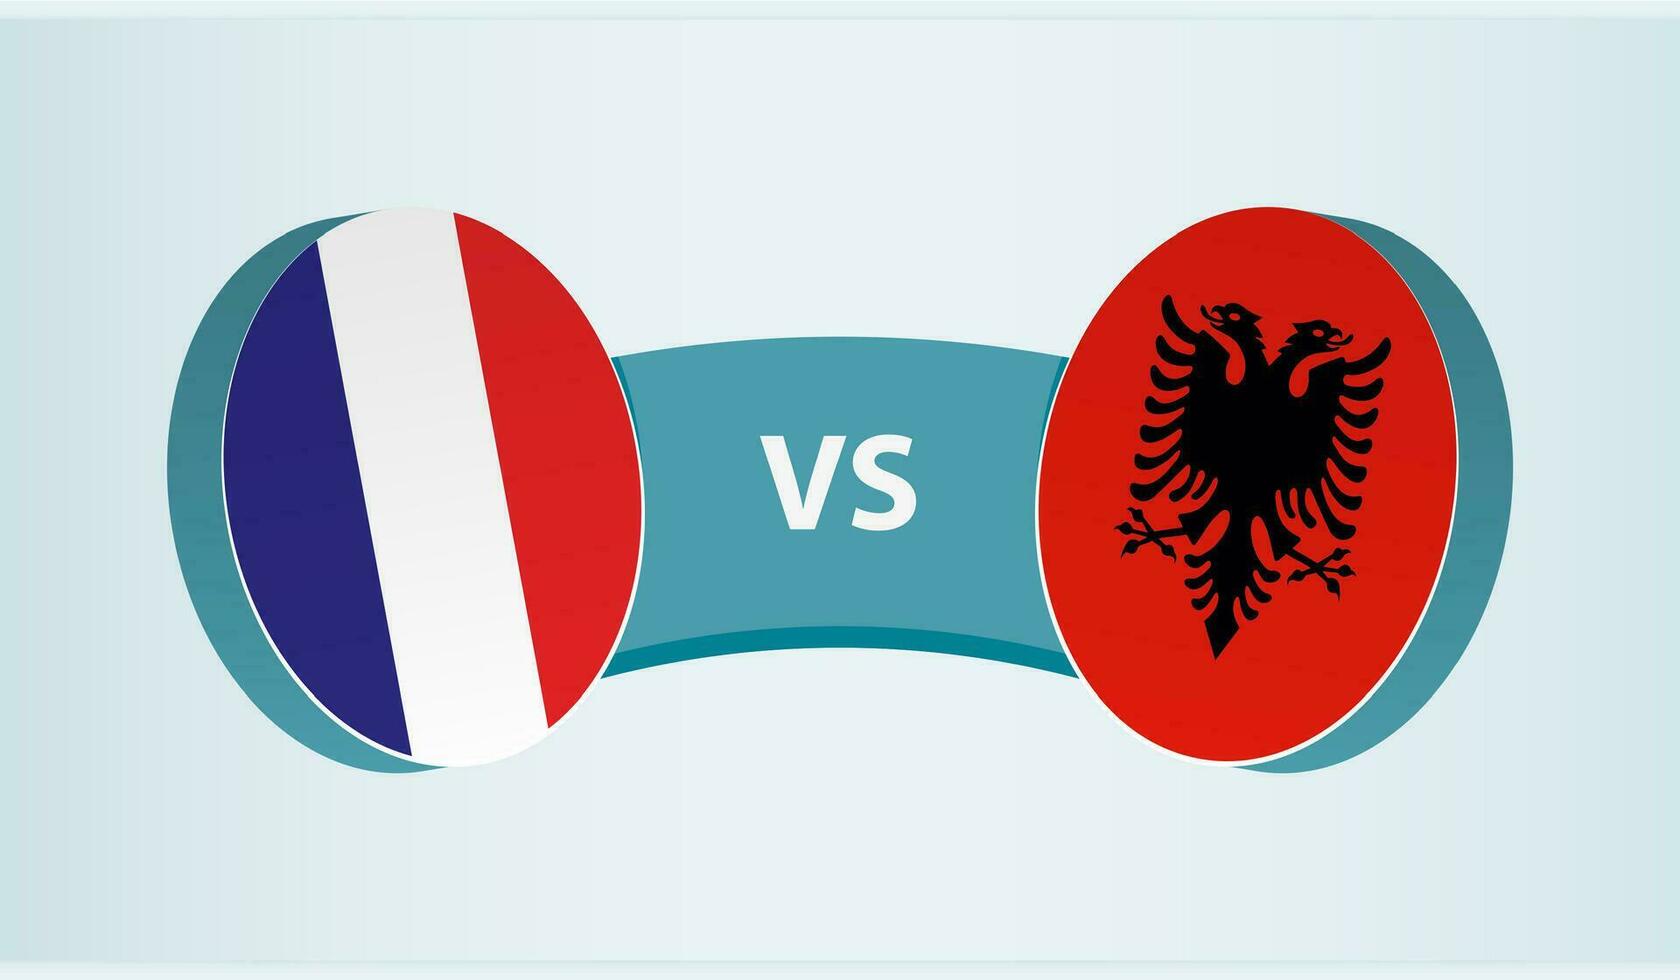 France versus Albania, team sports competition concept. vector